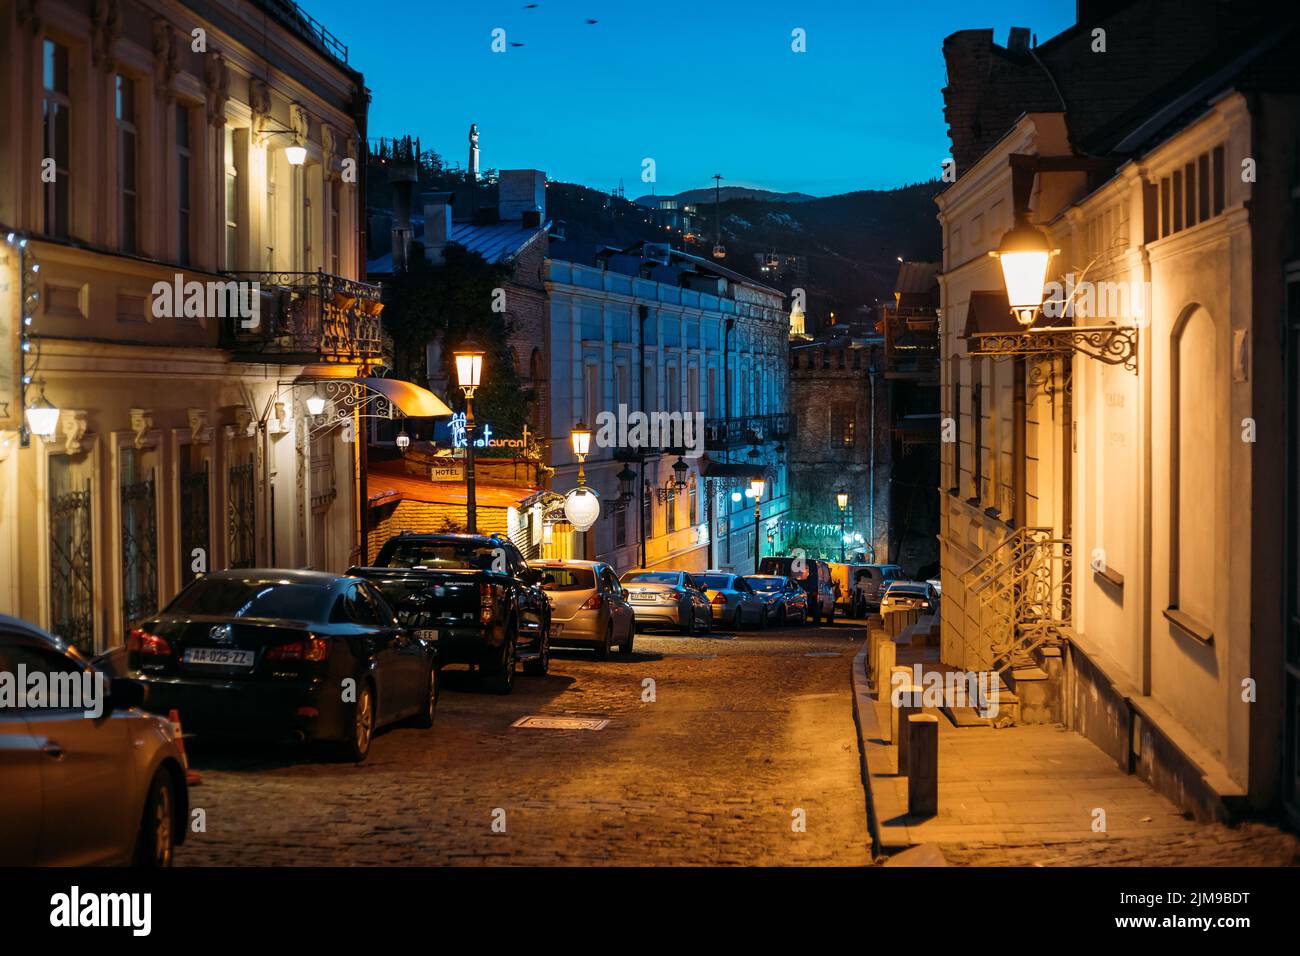 Tbilisi, Georgia - March 28, 2022: Parked Cars In A Row On A Victor Djorbenadze Street In Tbilisi. Night View Of City Streets Of Tbilisi Stock Photo